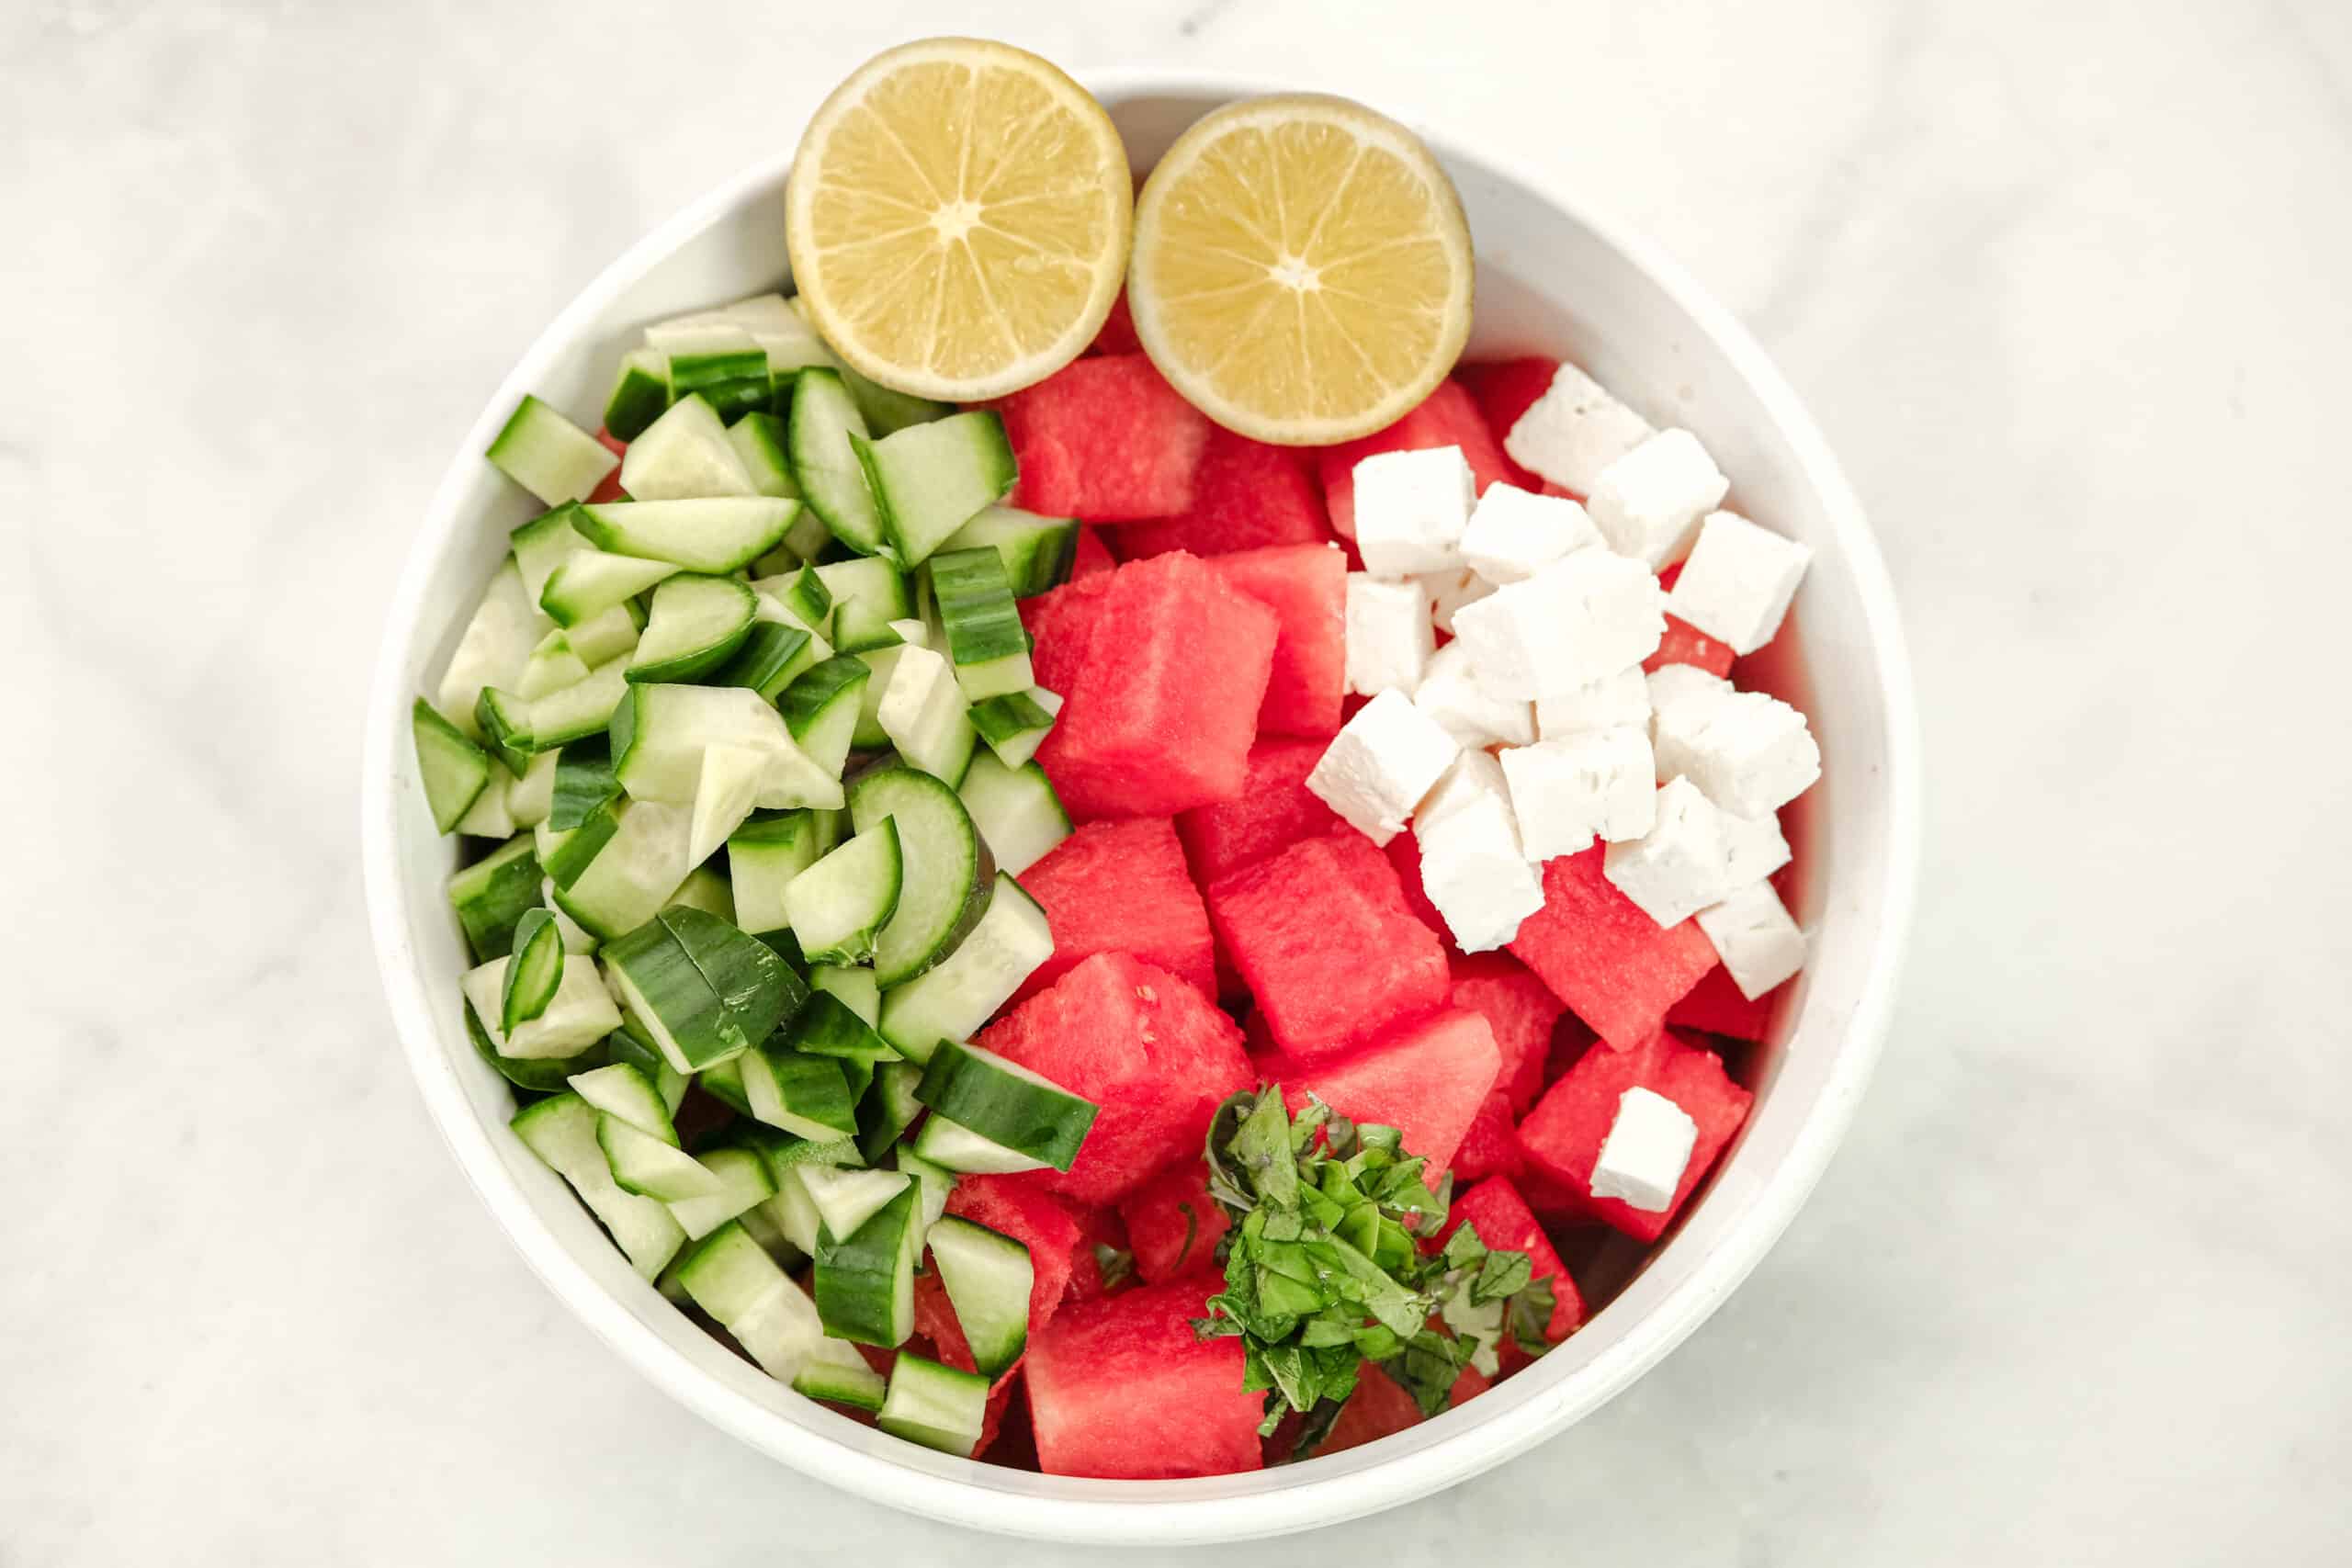 Watermelon salad with ingredients in a white bowl before stirring.